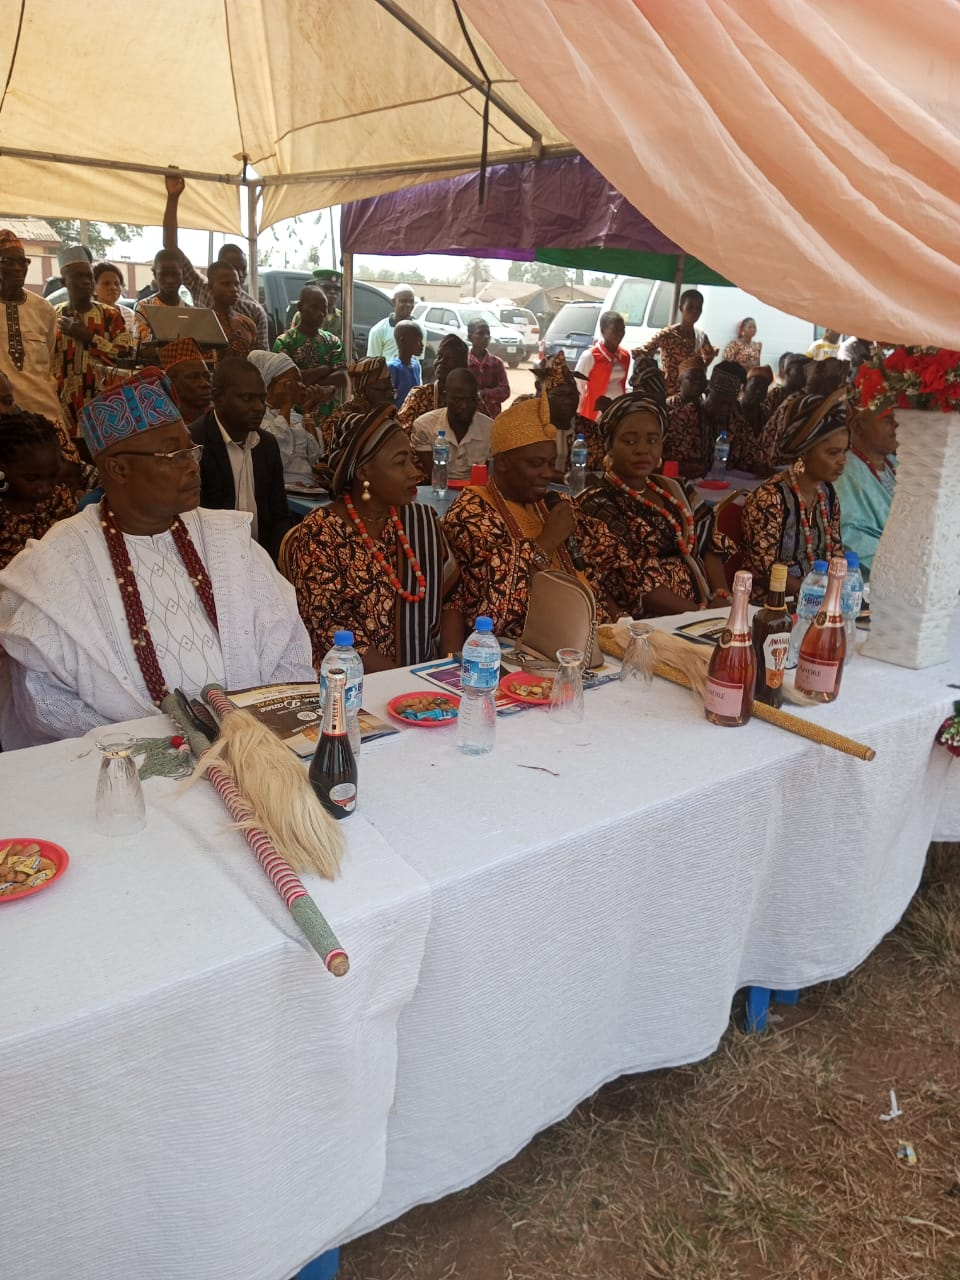 Lawmaker urges traditional rulers to preserve culture for younger ones